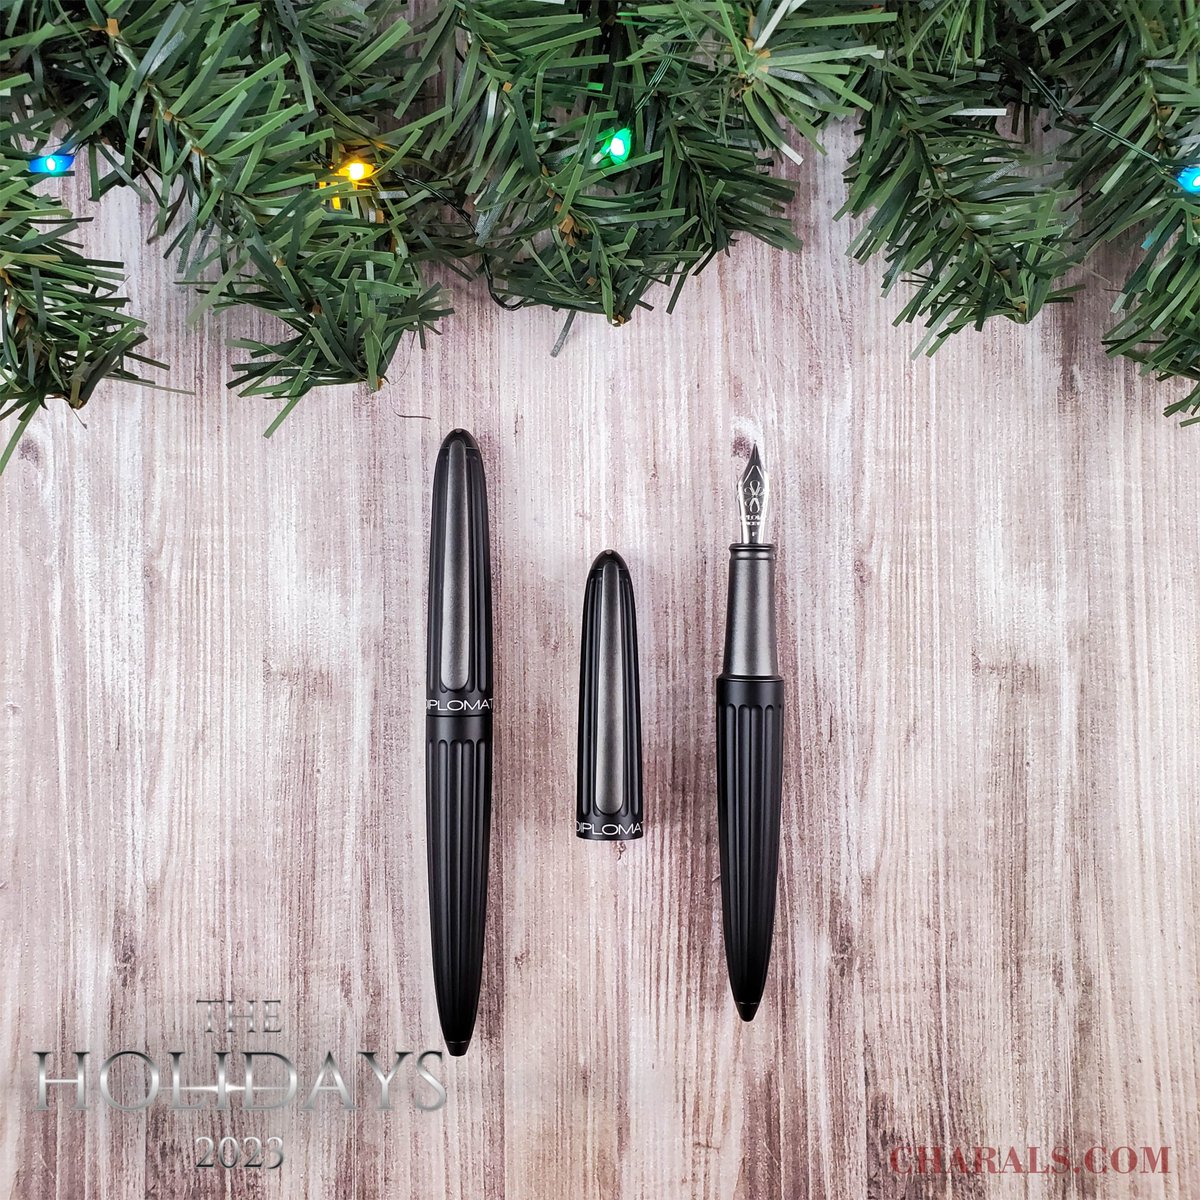 The Diplomat Aero collection is perfect for the pen lover looking for something non-traditional and different! 🎁🎁🎁 #diplomatpens #diplomataero #aeropen #diplomatfp #aerofountainpen #matteblack #modernpen #vancouverpenstore #vancouverpenshop #xmasgifts #christmaspresents